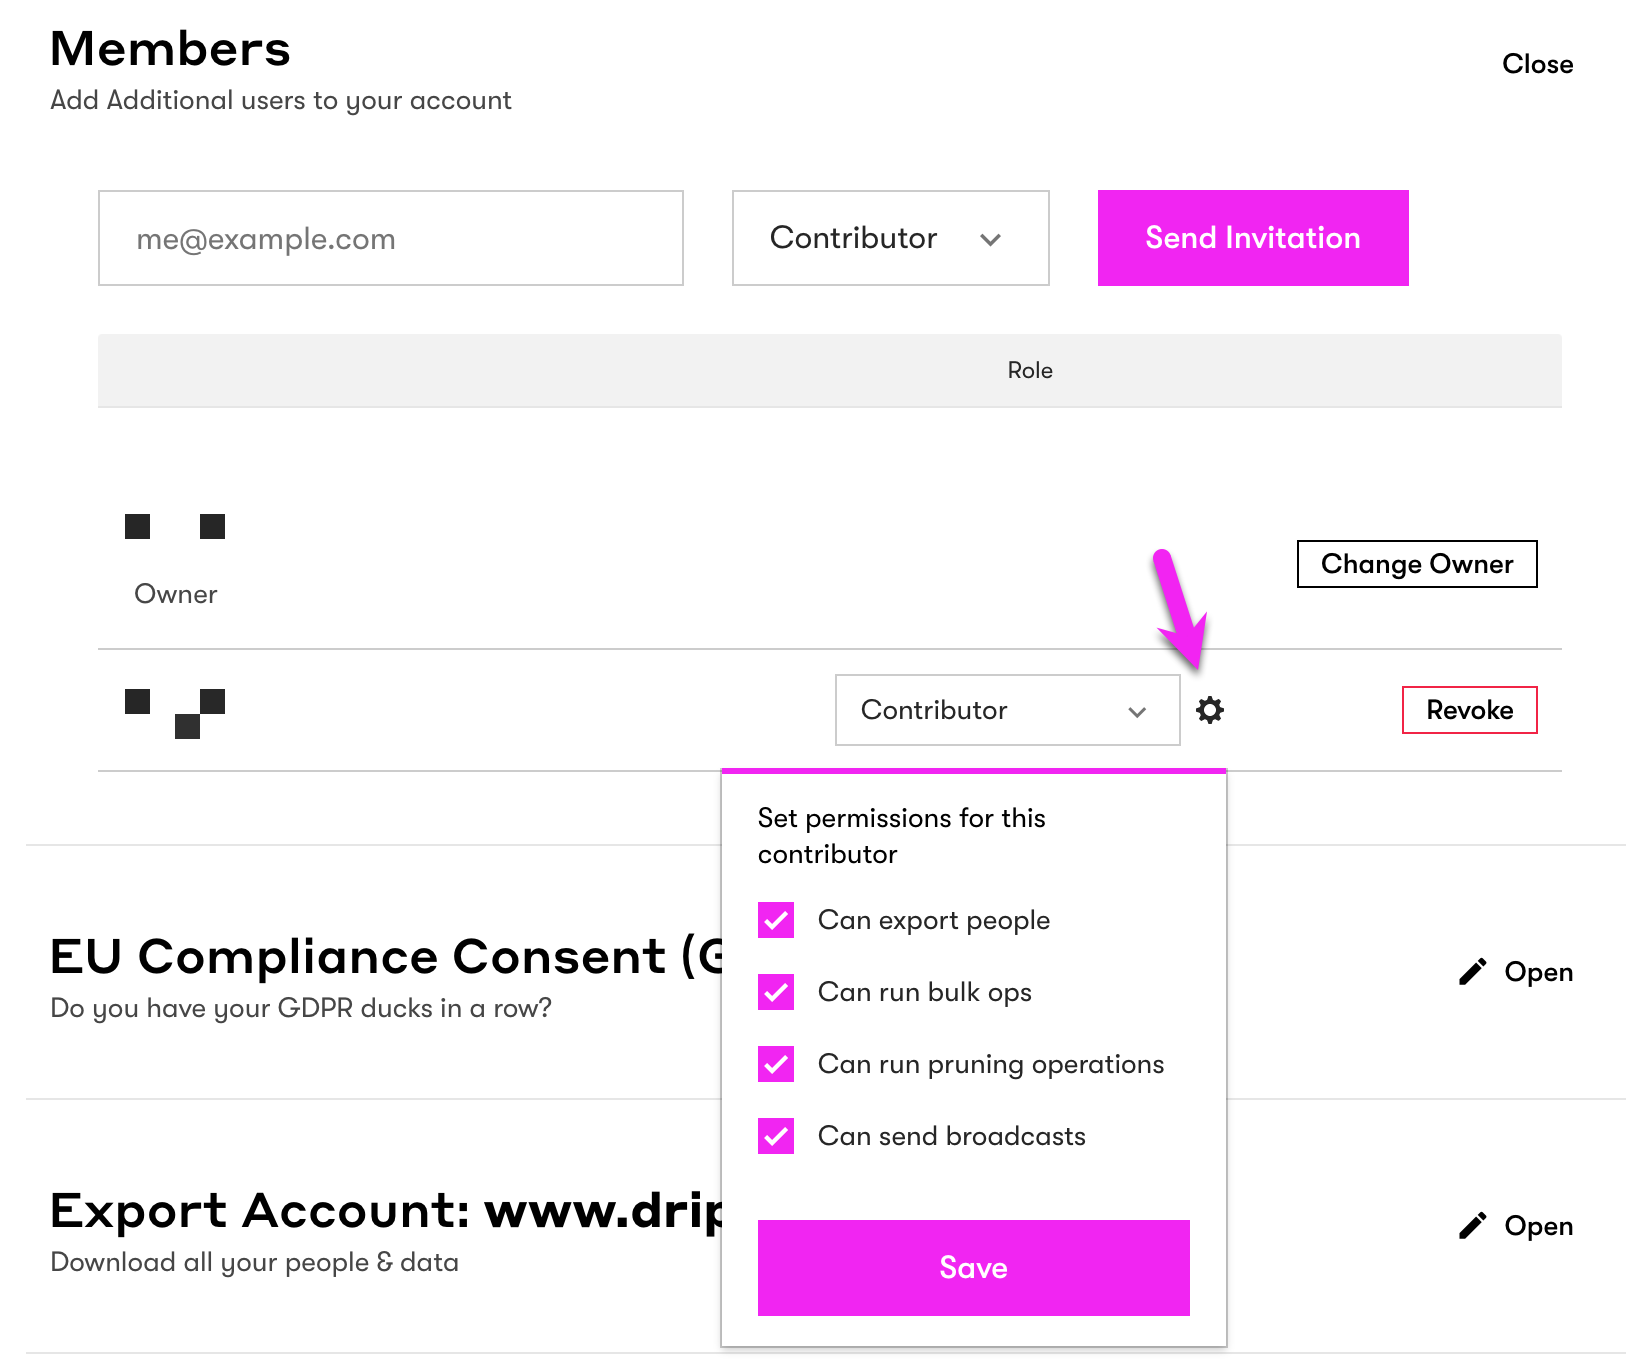 Member Role Contributor Permissions in the account settings page